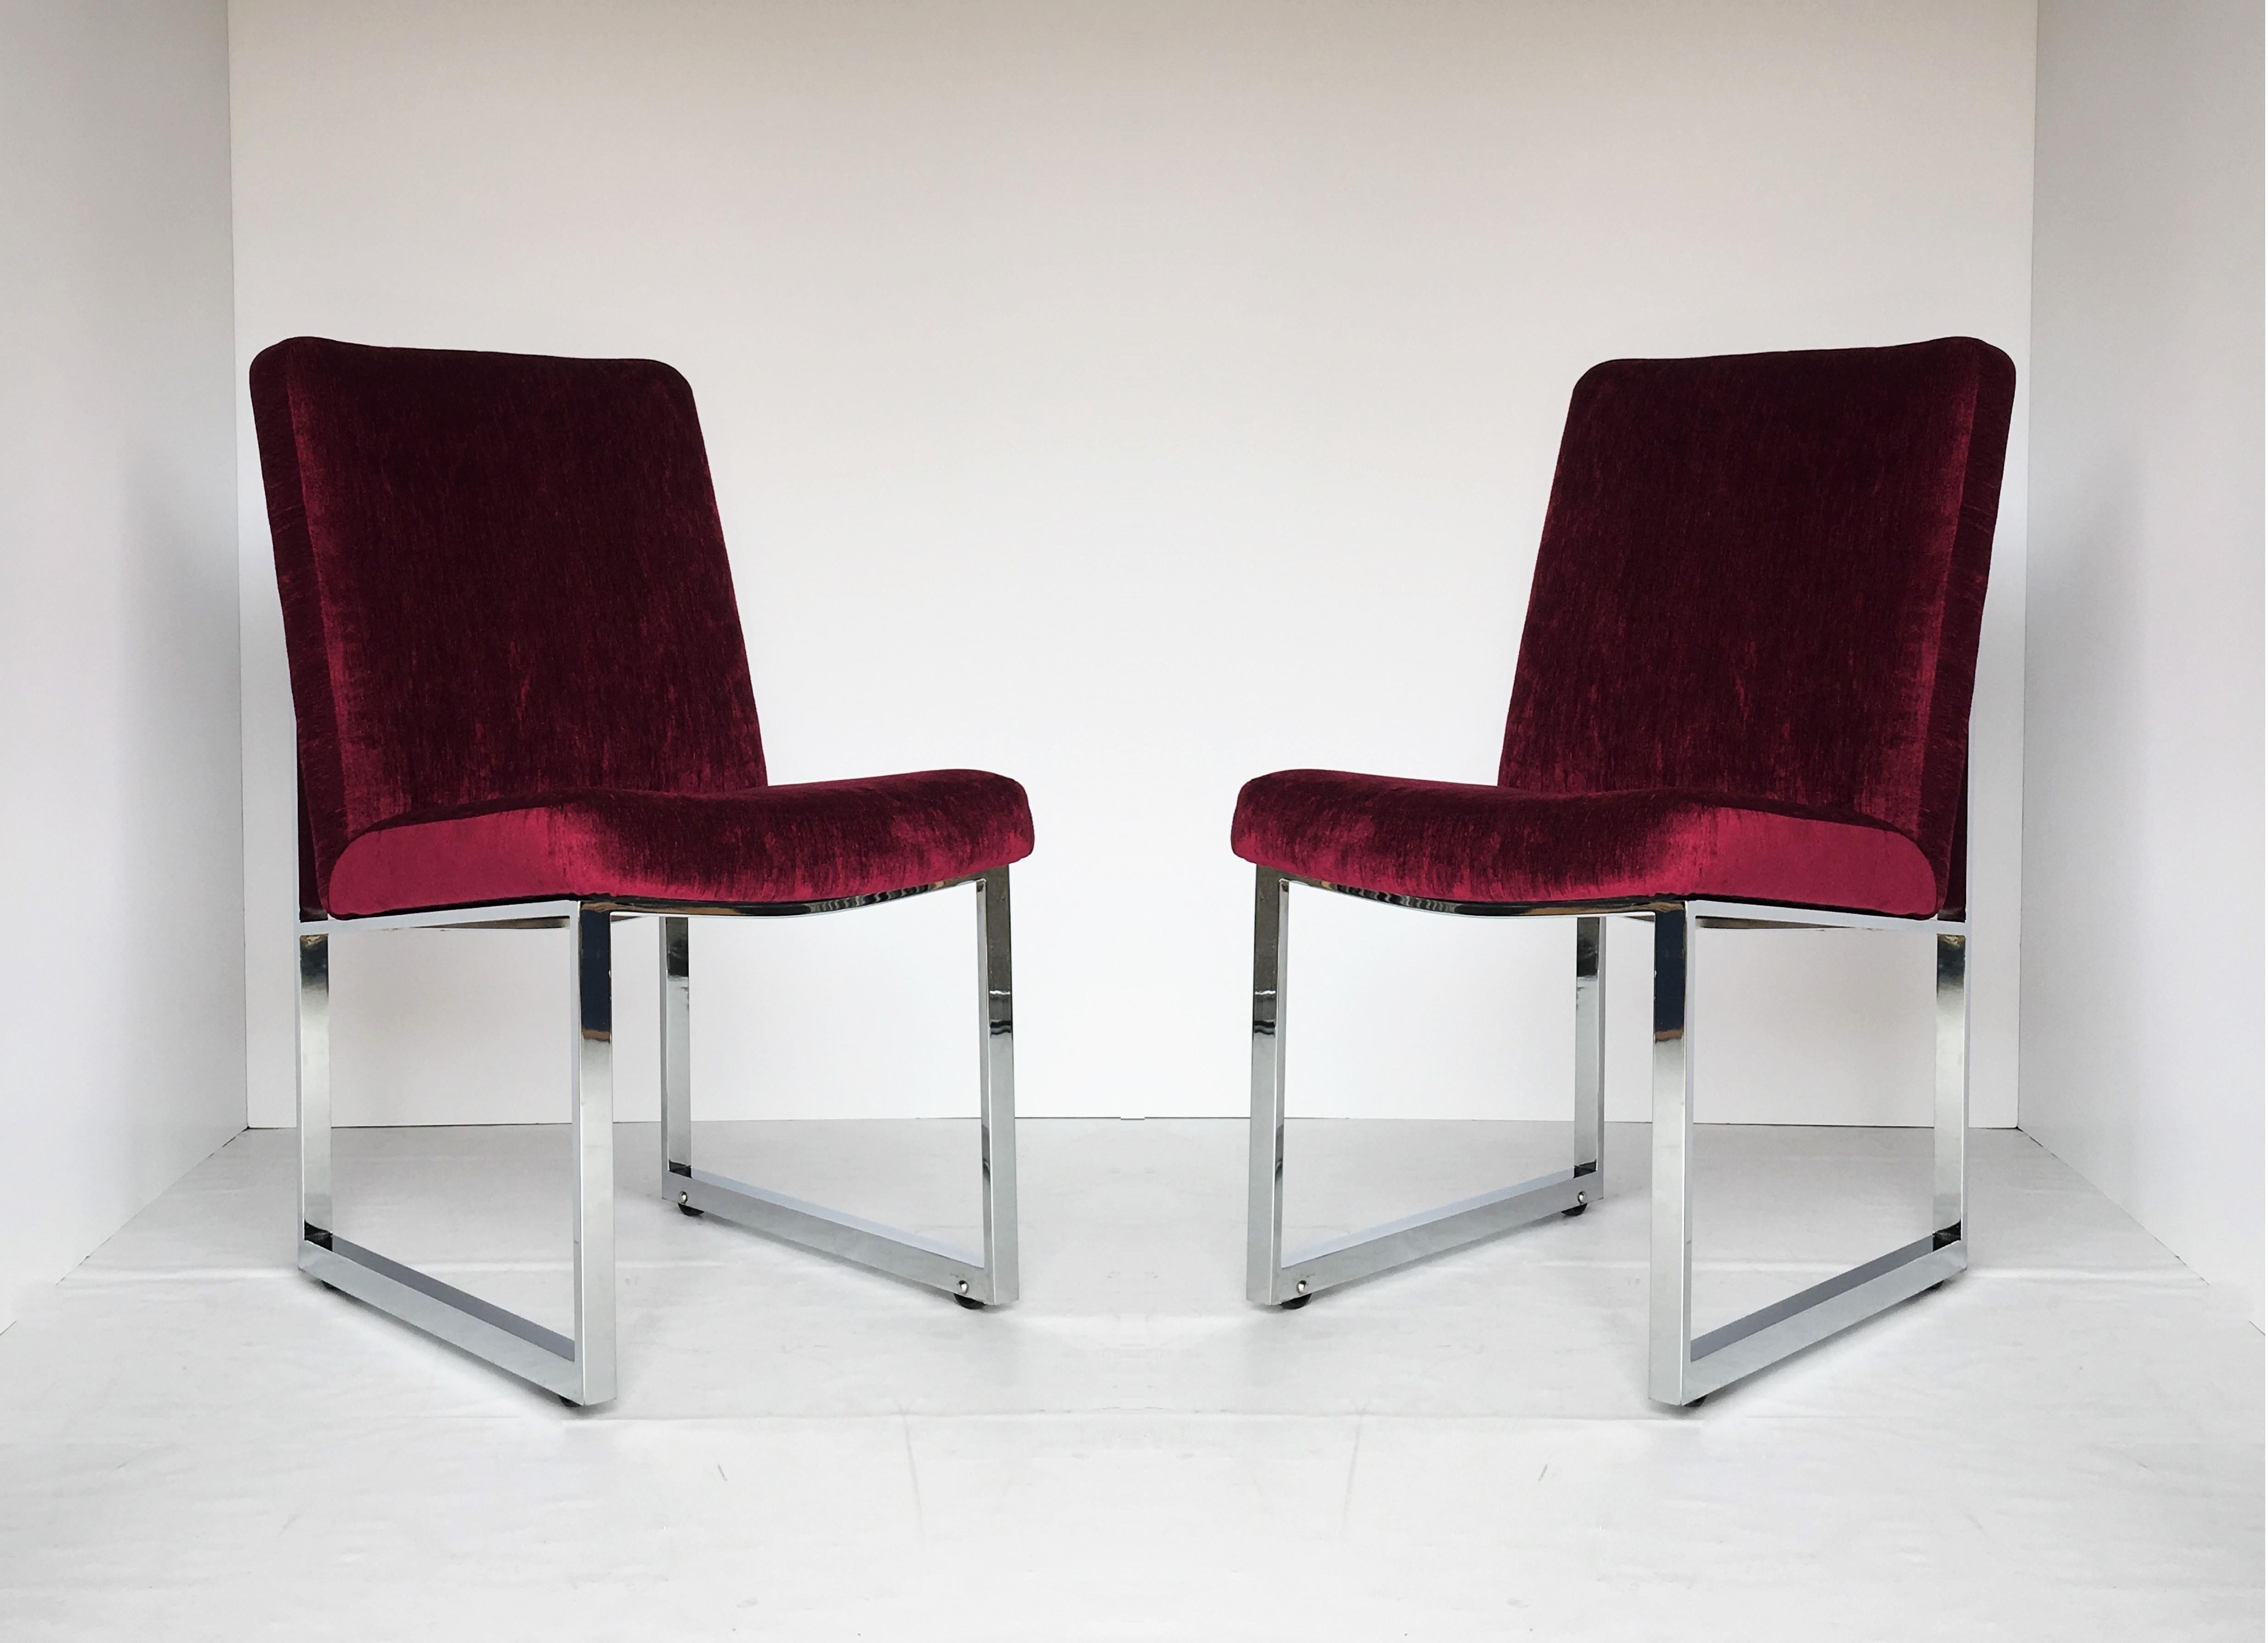 These hard to find and highly coveted set of original flat bar dining chairs designed by Milo Baughman for Thayer Coggin, circa 1976. The chairs feature fully re-upholstered bodies over polished chrome frames. Each chair has a set of four tiny